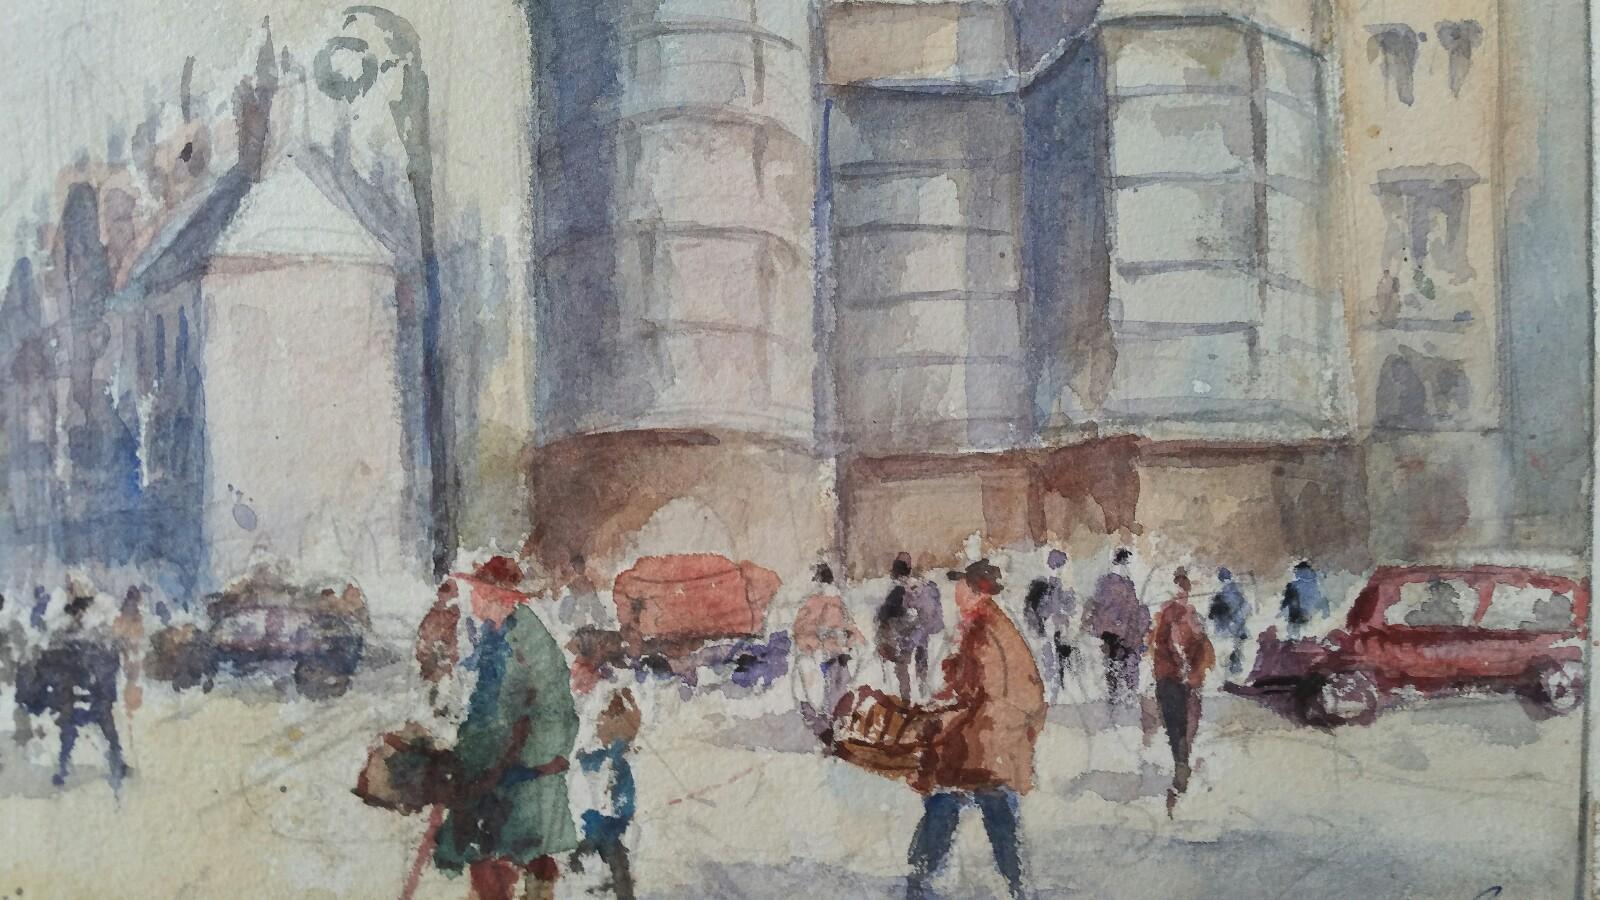 Belgium. Brussels - A Street Scene
by Leonard Machin Rowe (1880-1968)
signed front lower right corner, inscribed, dated and signed to the back
watercolour painting on artist's paper, unframed

Image 9.75 x 13.75 inches, sheet 11 x 15